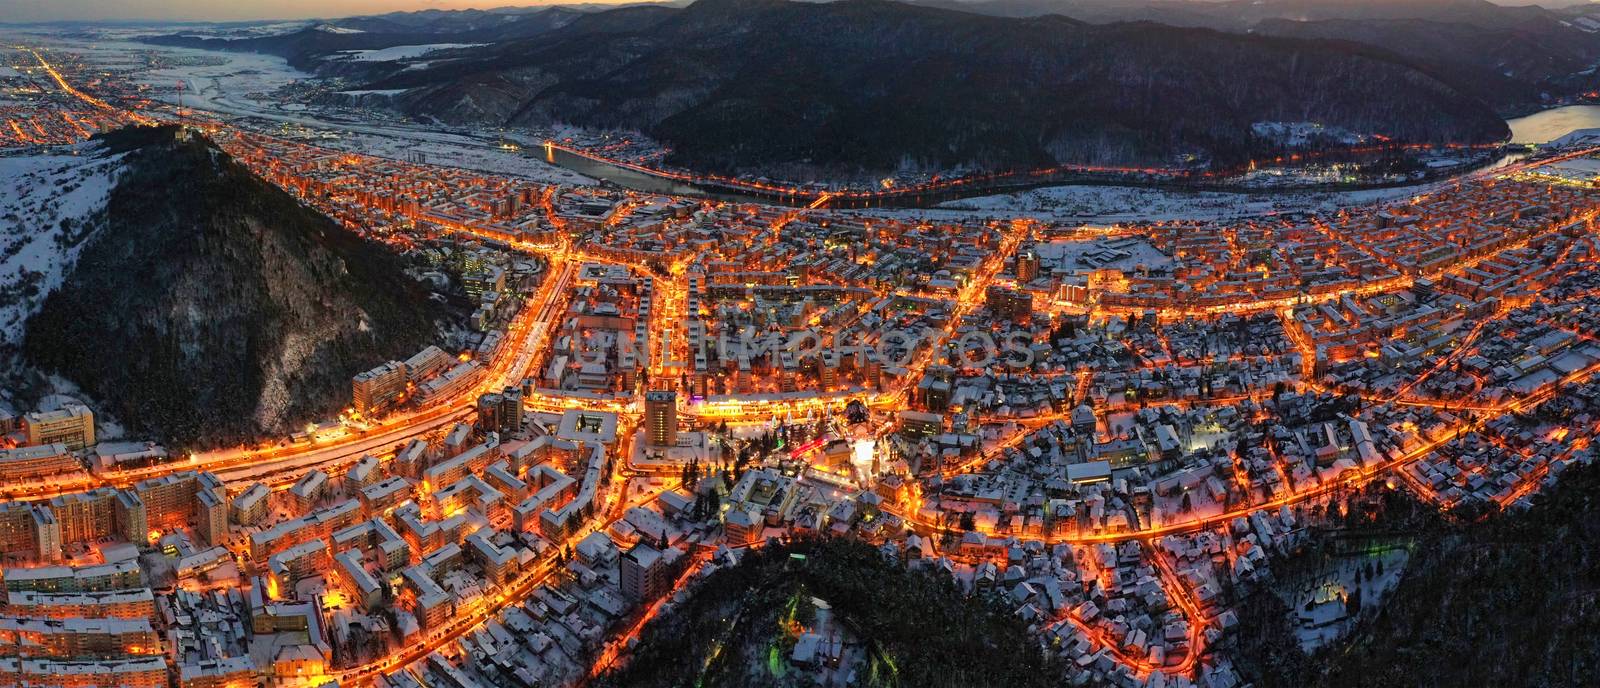 Aerial view of city lights in winter evening. Aerial panorama of Piatra Neamt in Romania